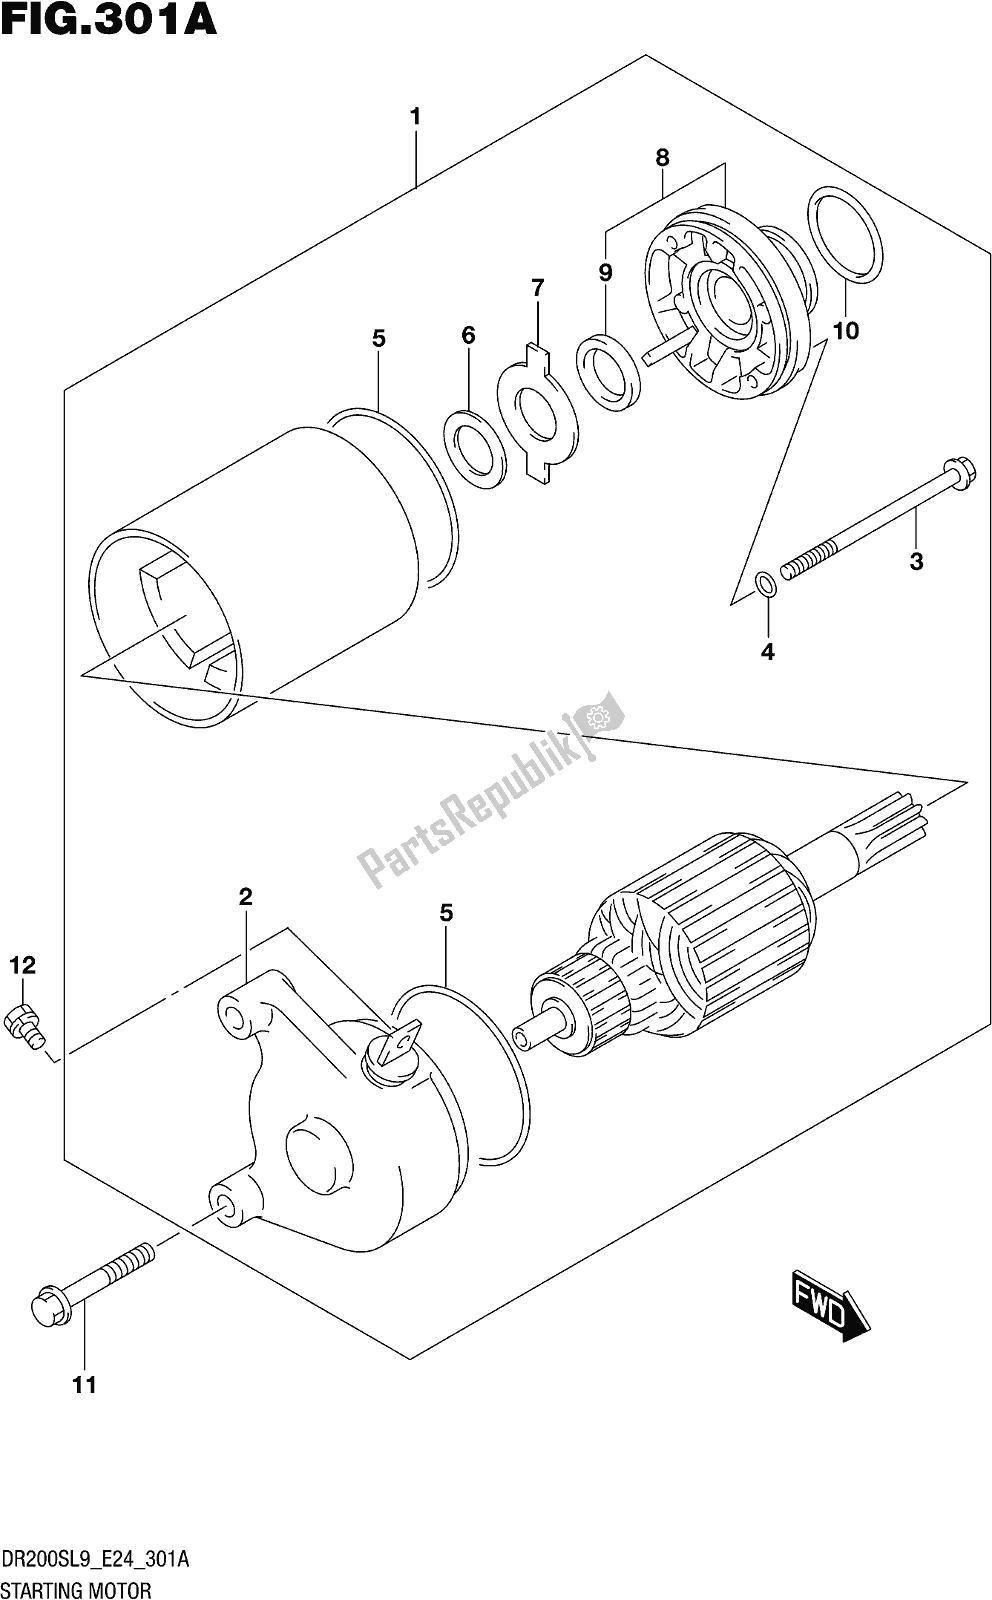 All parts for the Fig. 301a Starting Motor of the Suzuki DR 200S 2019